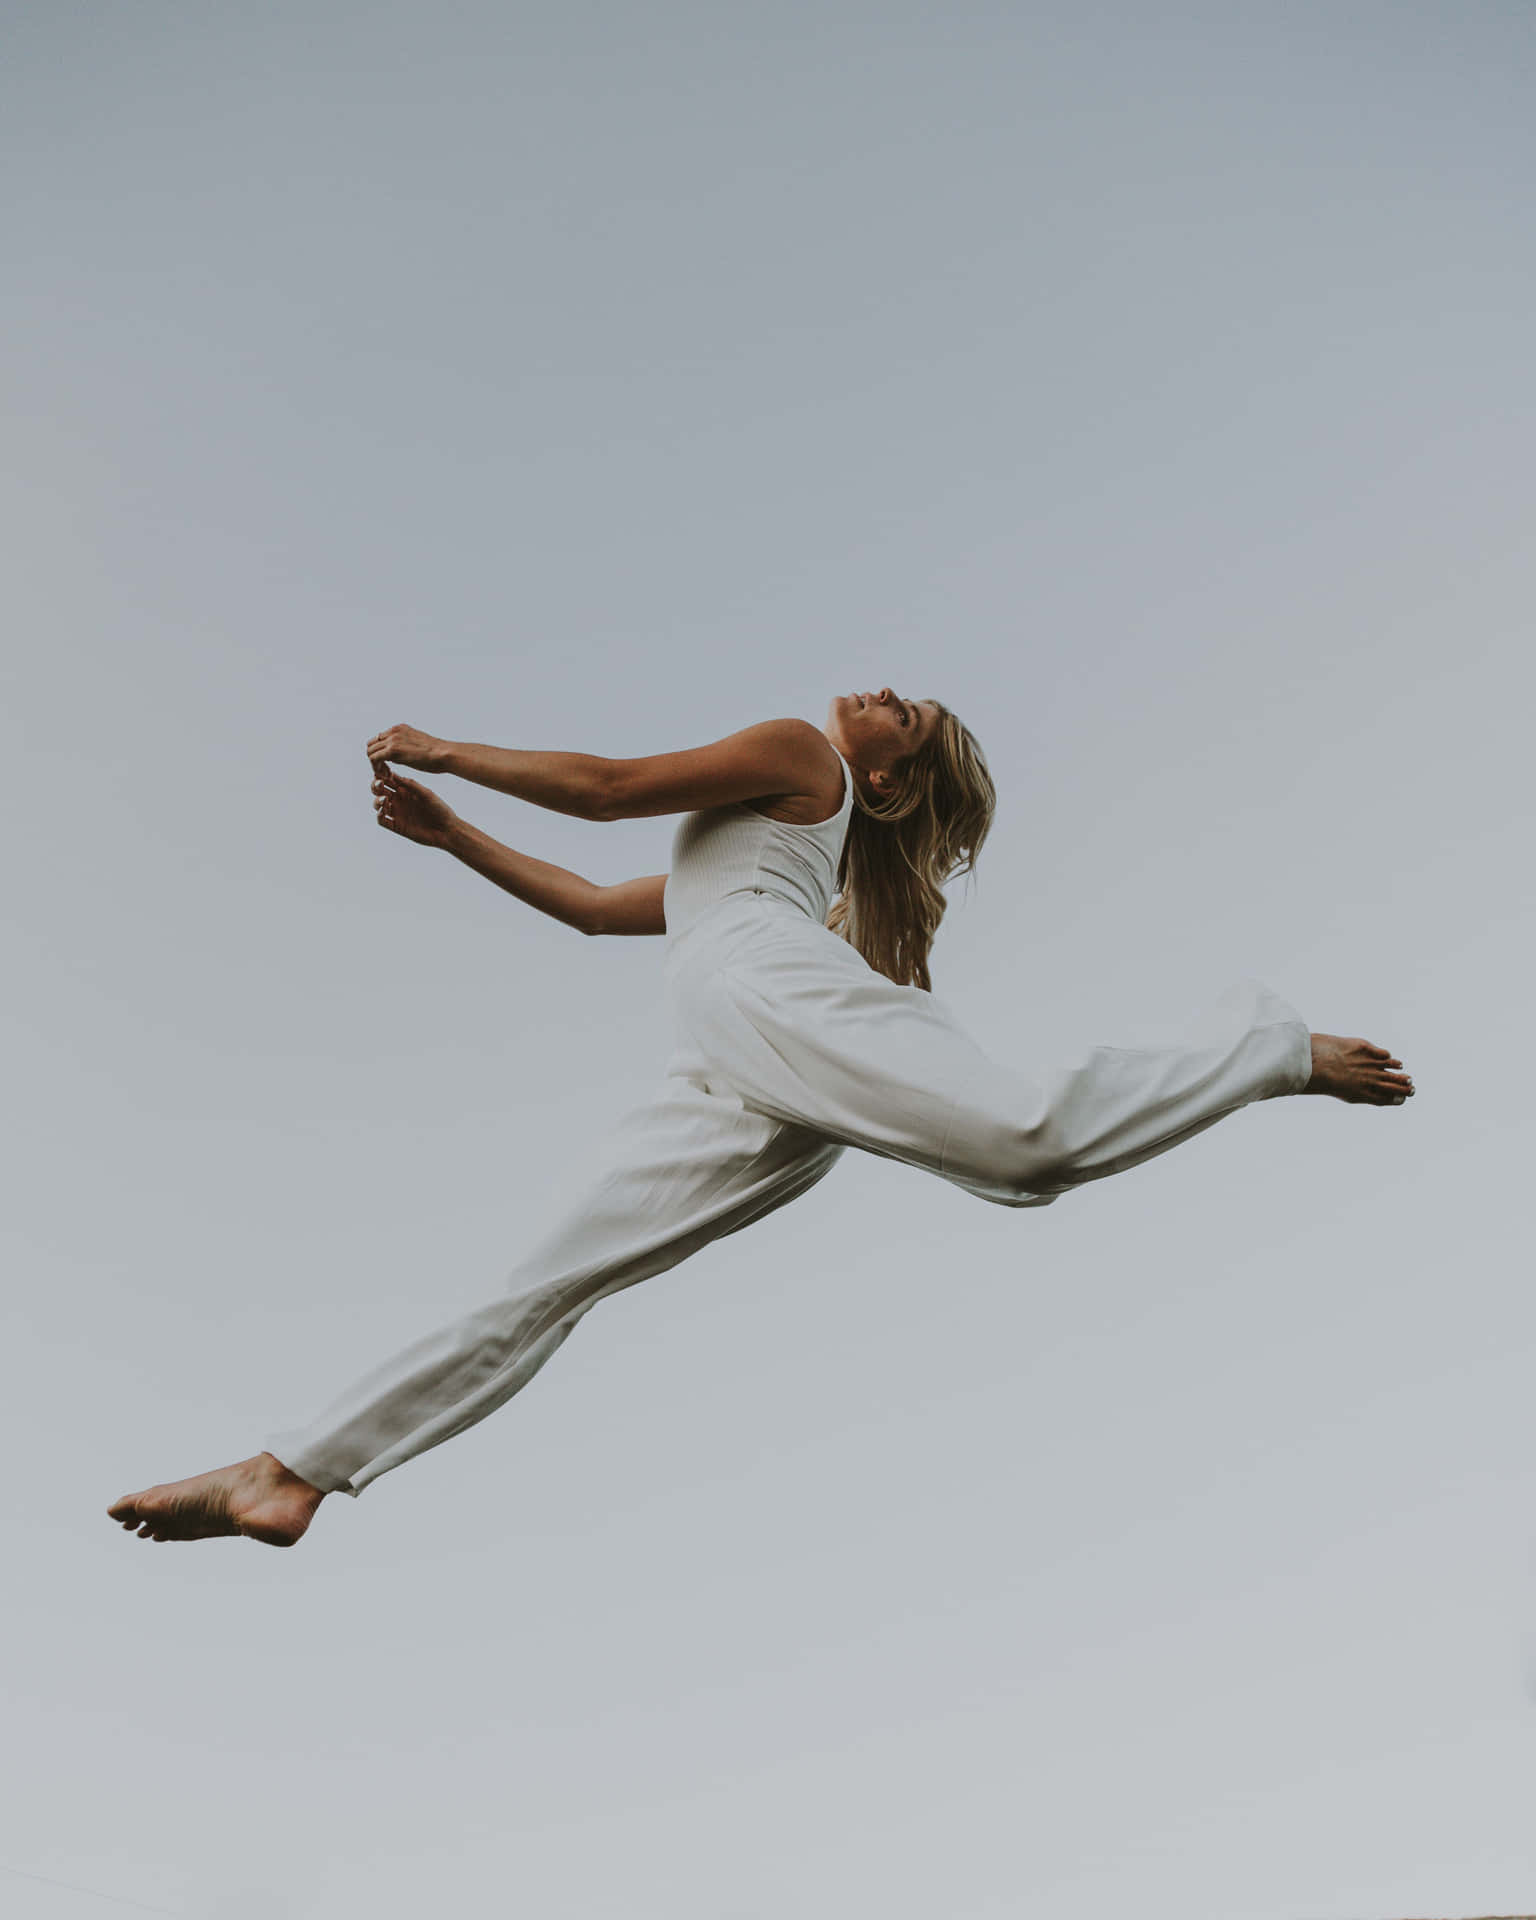 A Woman In White Jumps In The Air